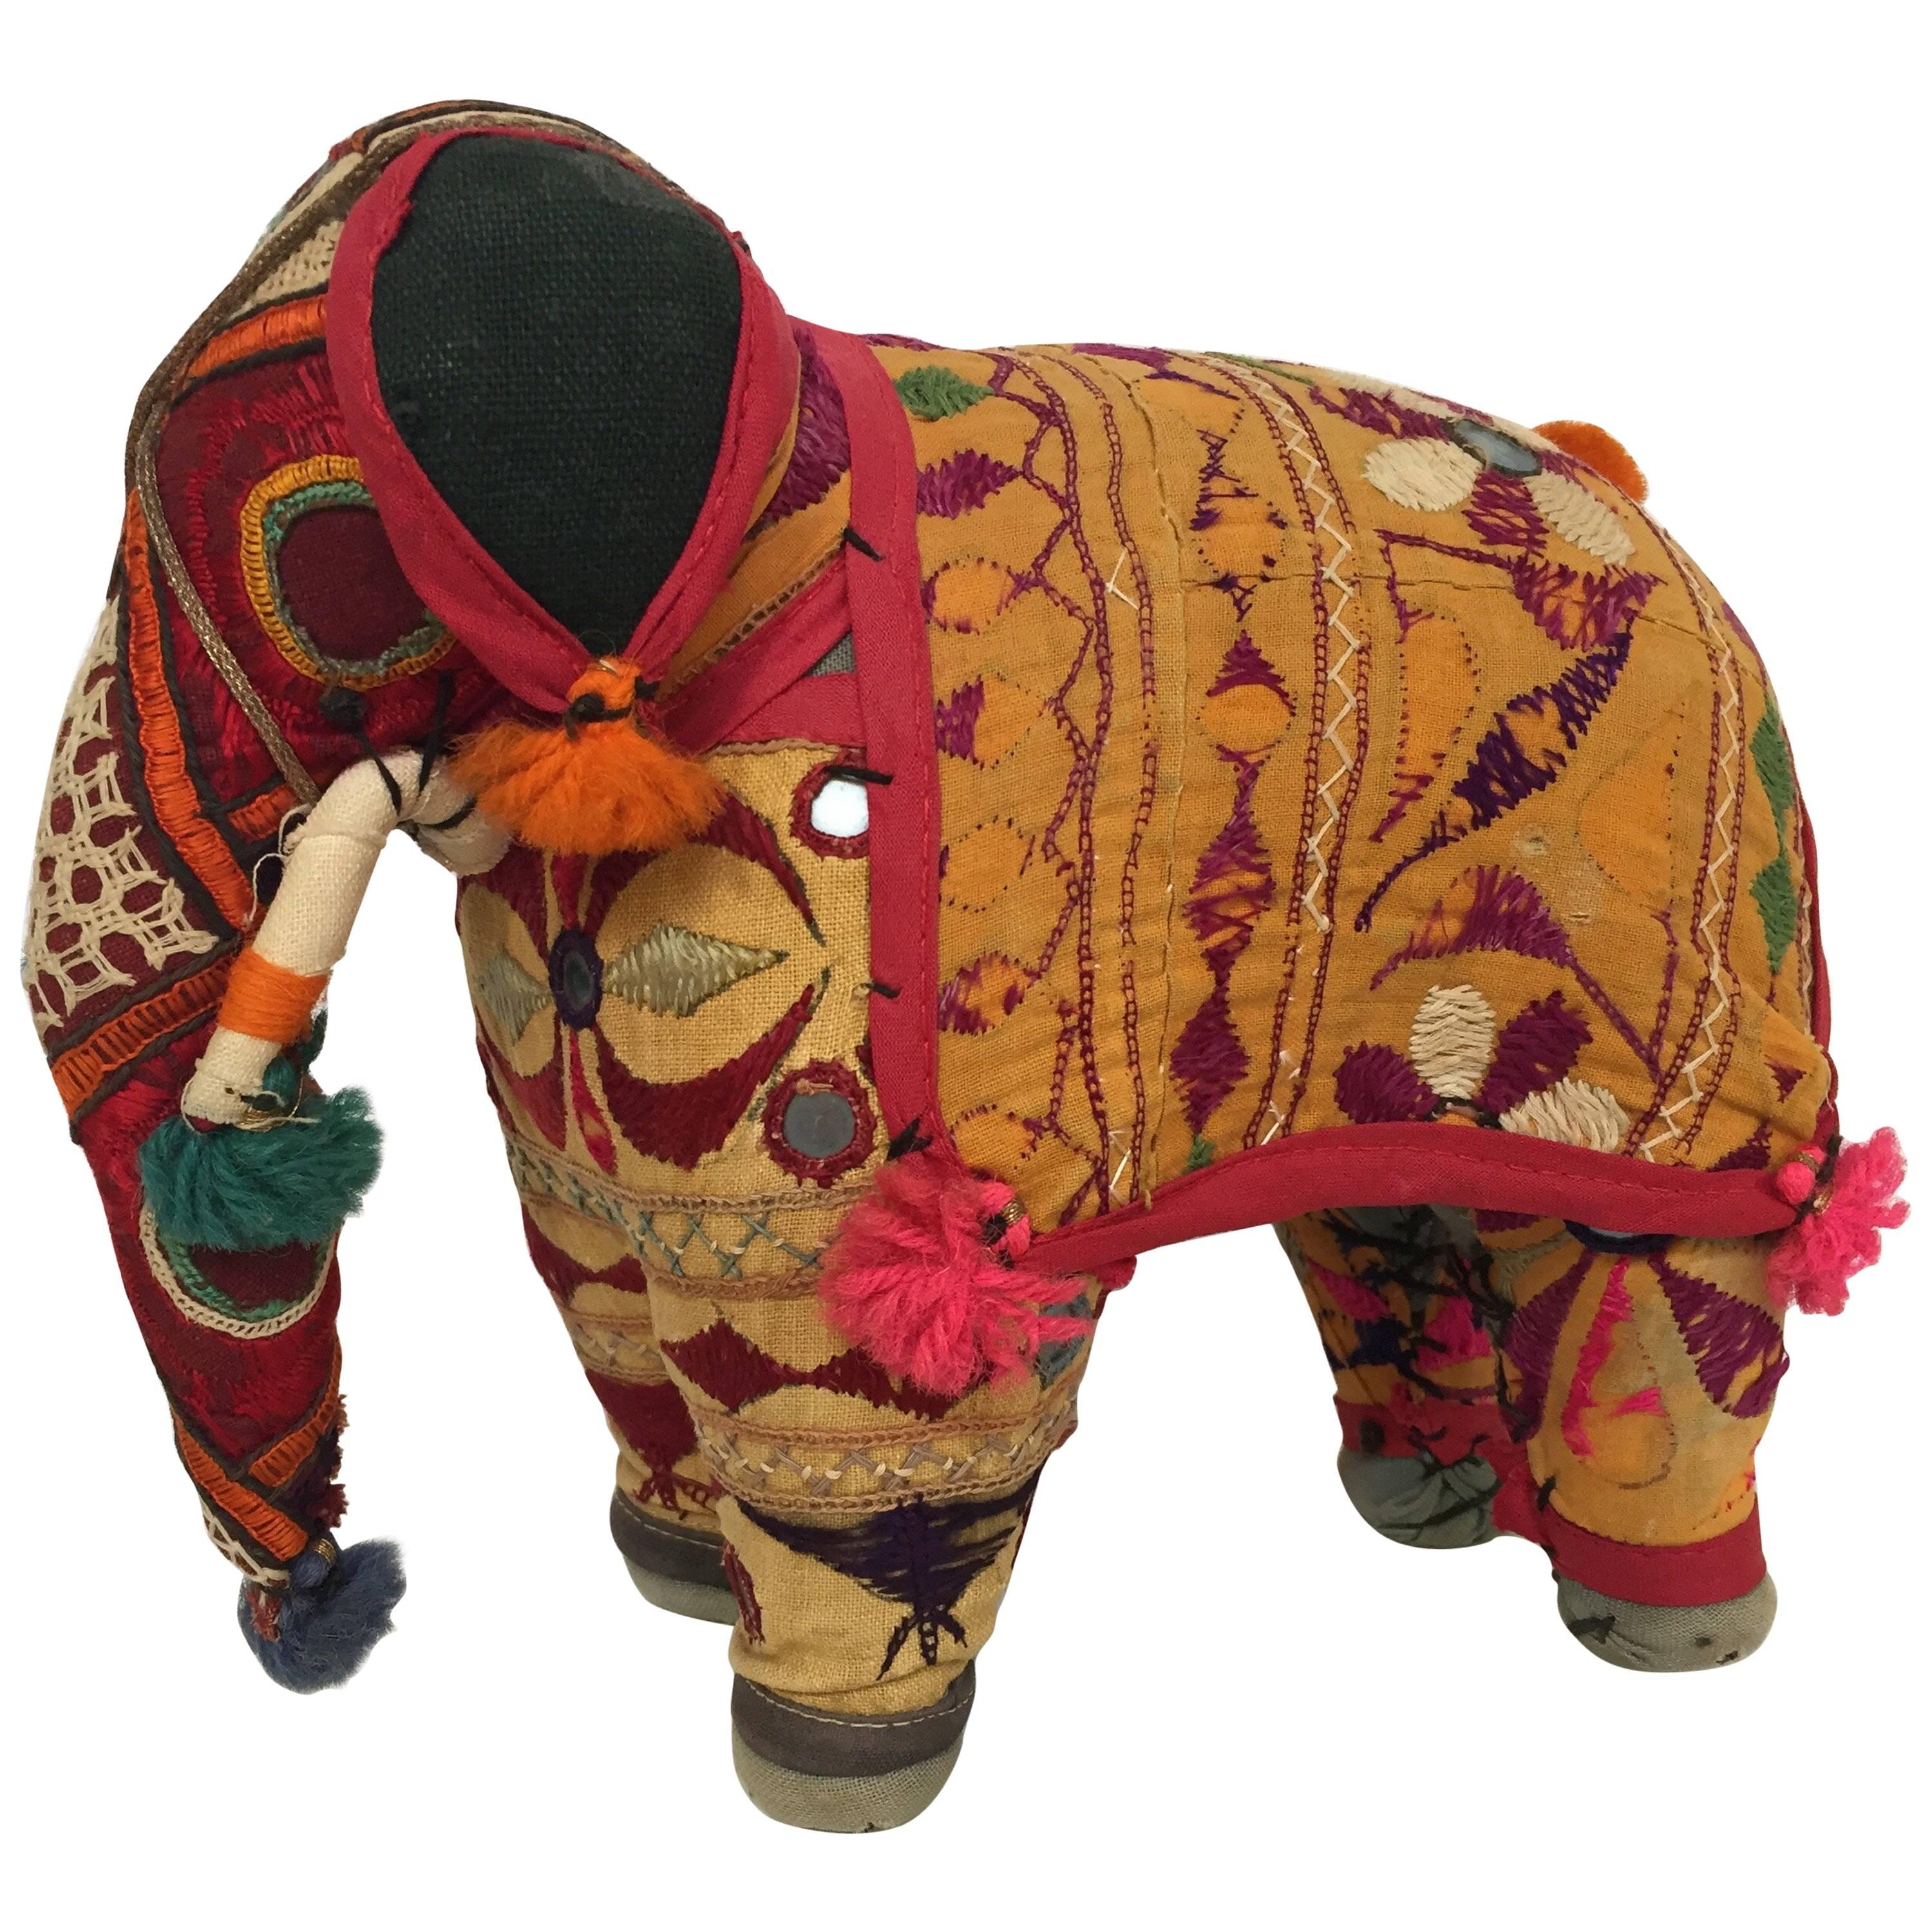 Hand-Crafted Anglo Raj Vintage Stuffed Cotton Embroidered Elephant, India 1950